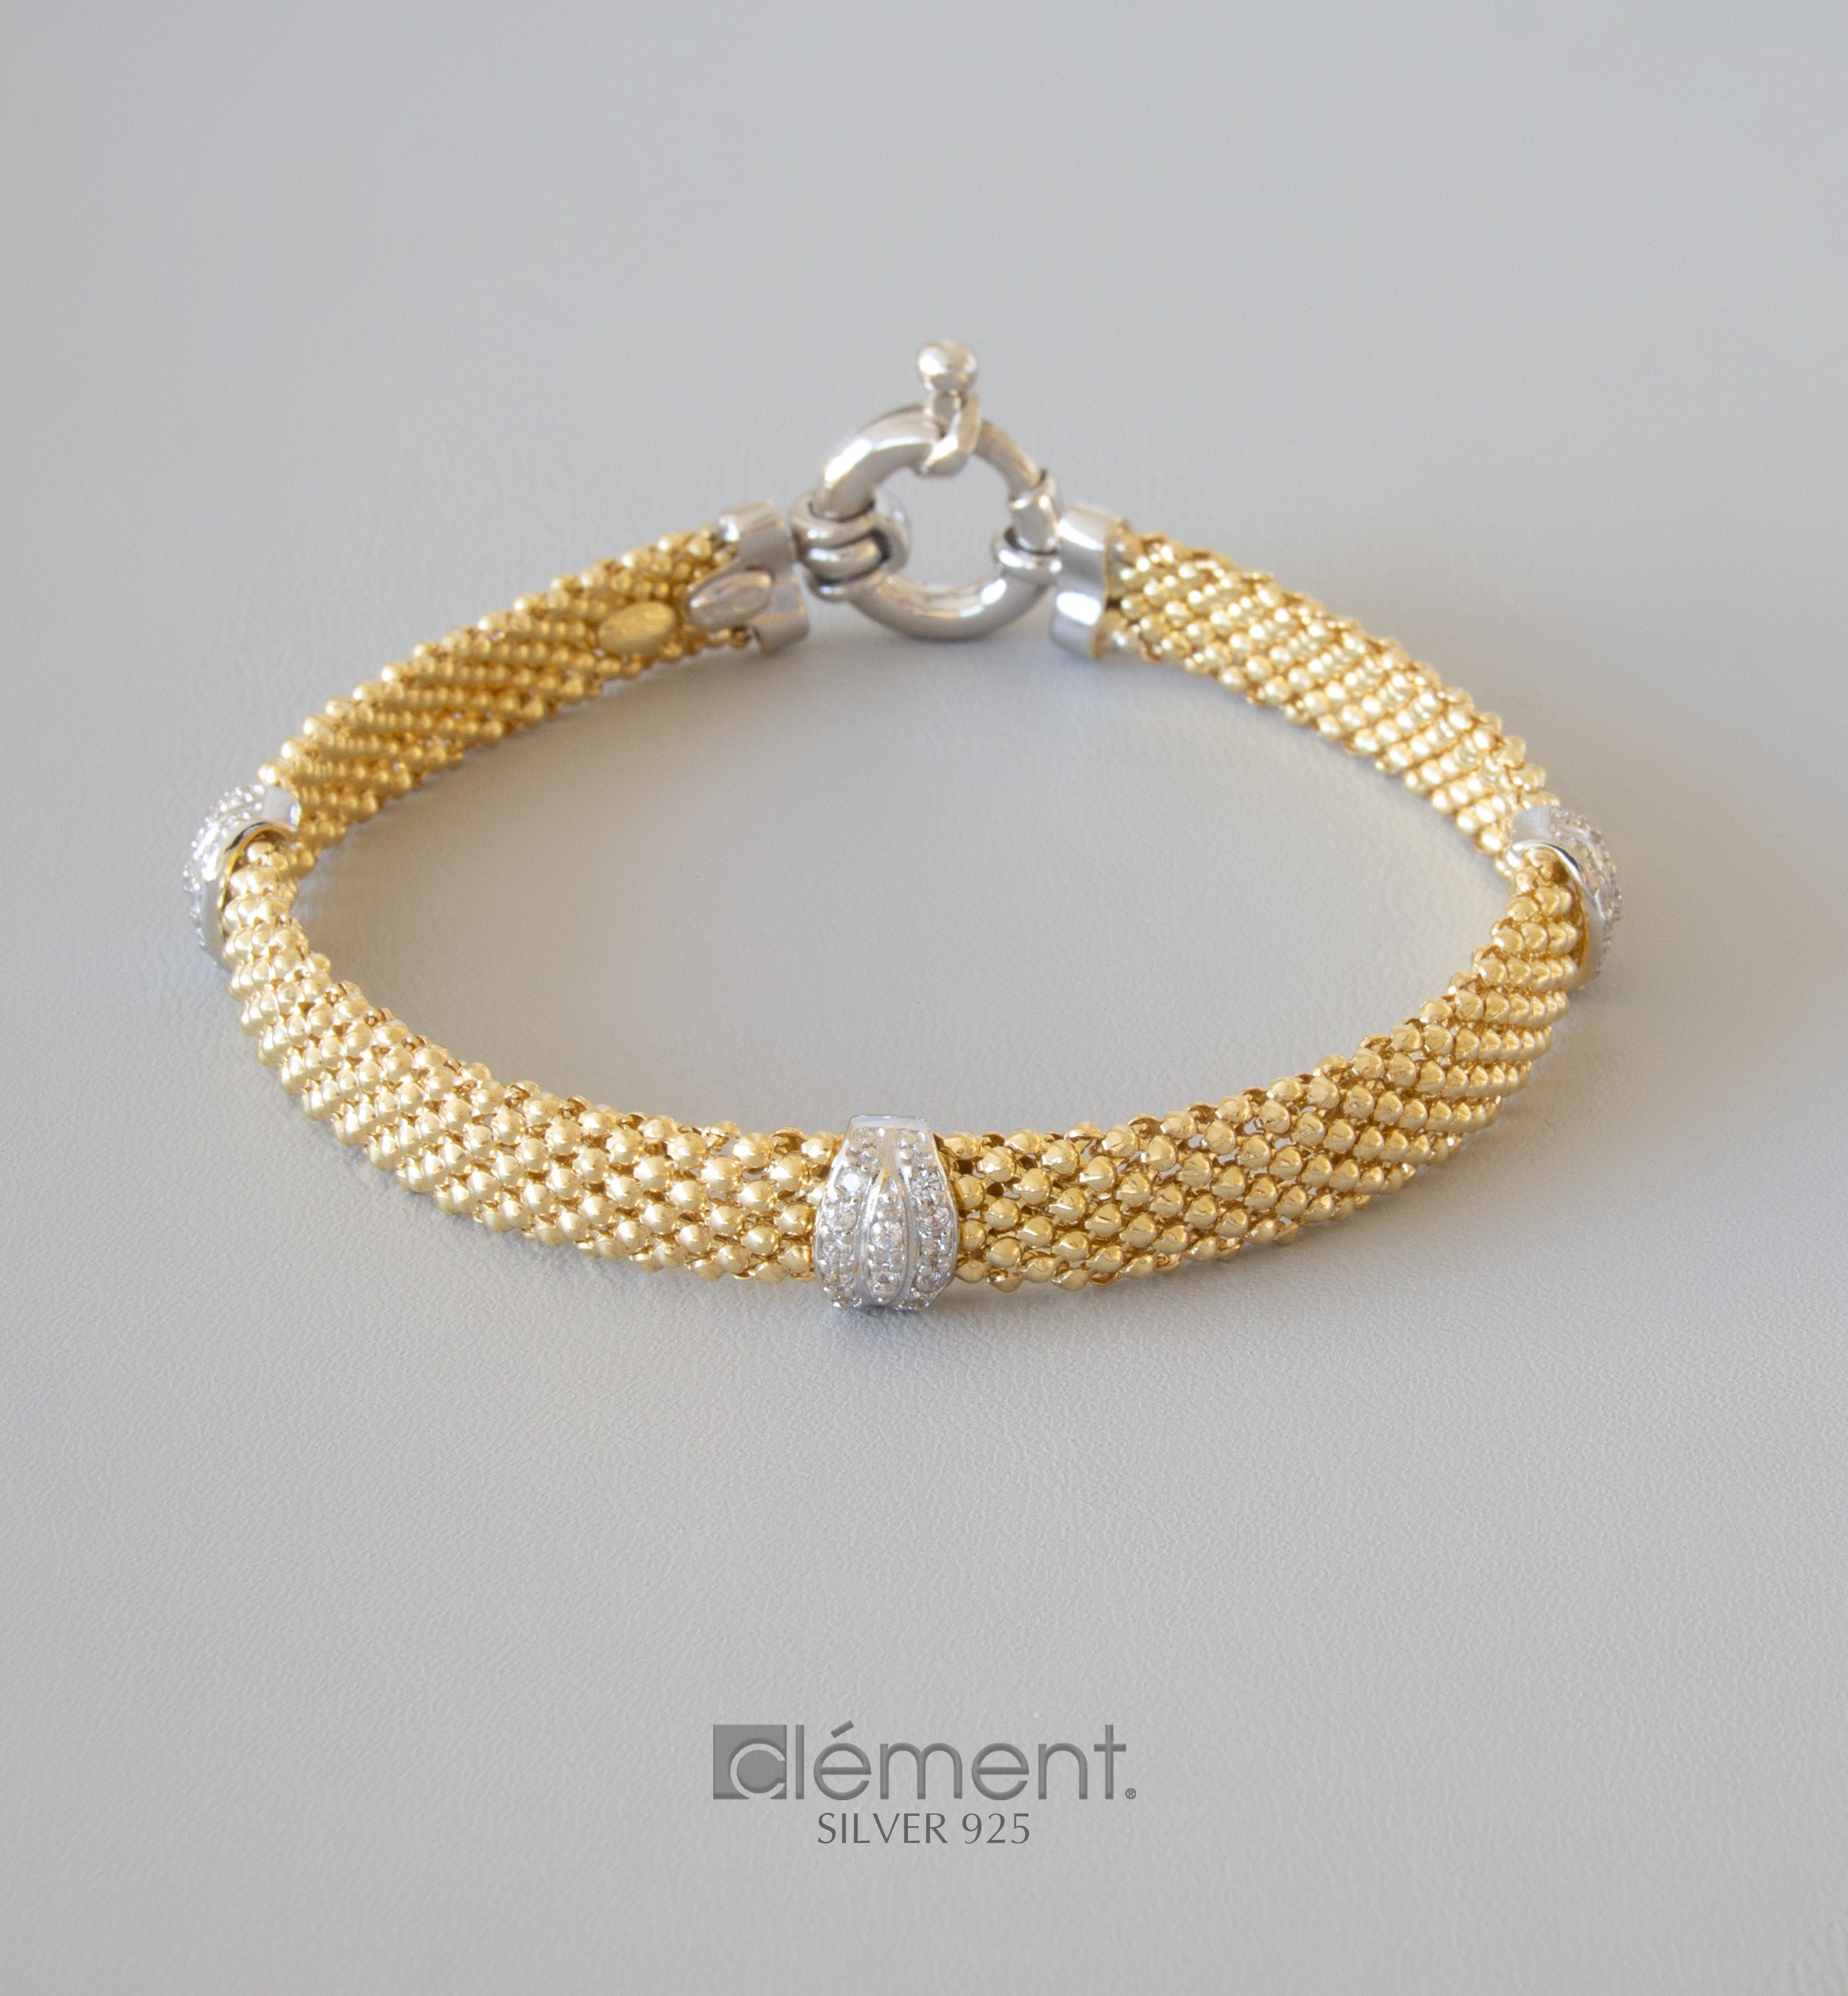 Silver 925 Two-Tone Bracelet with Cubic Zirconia Stones